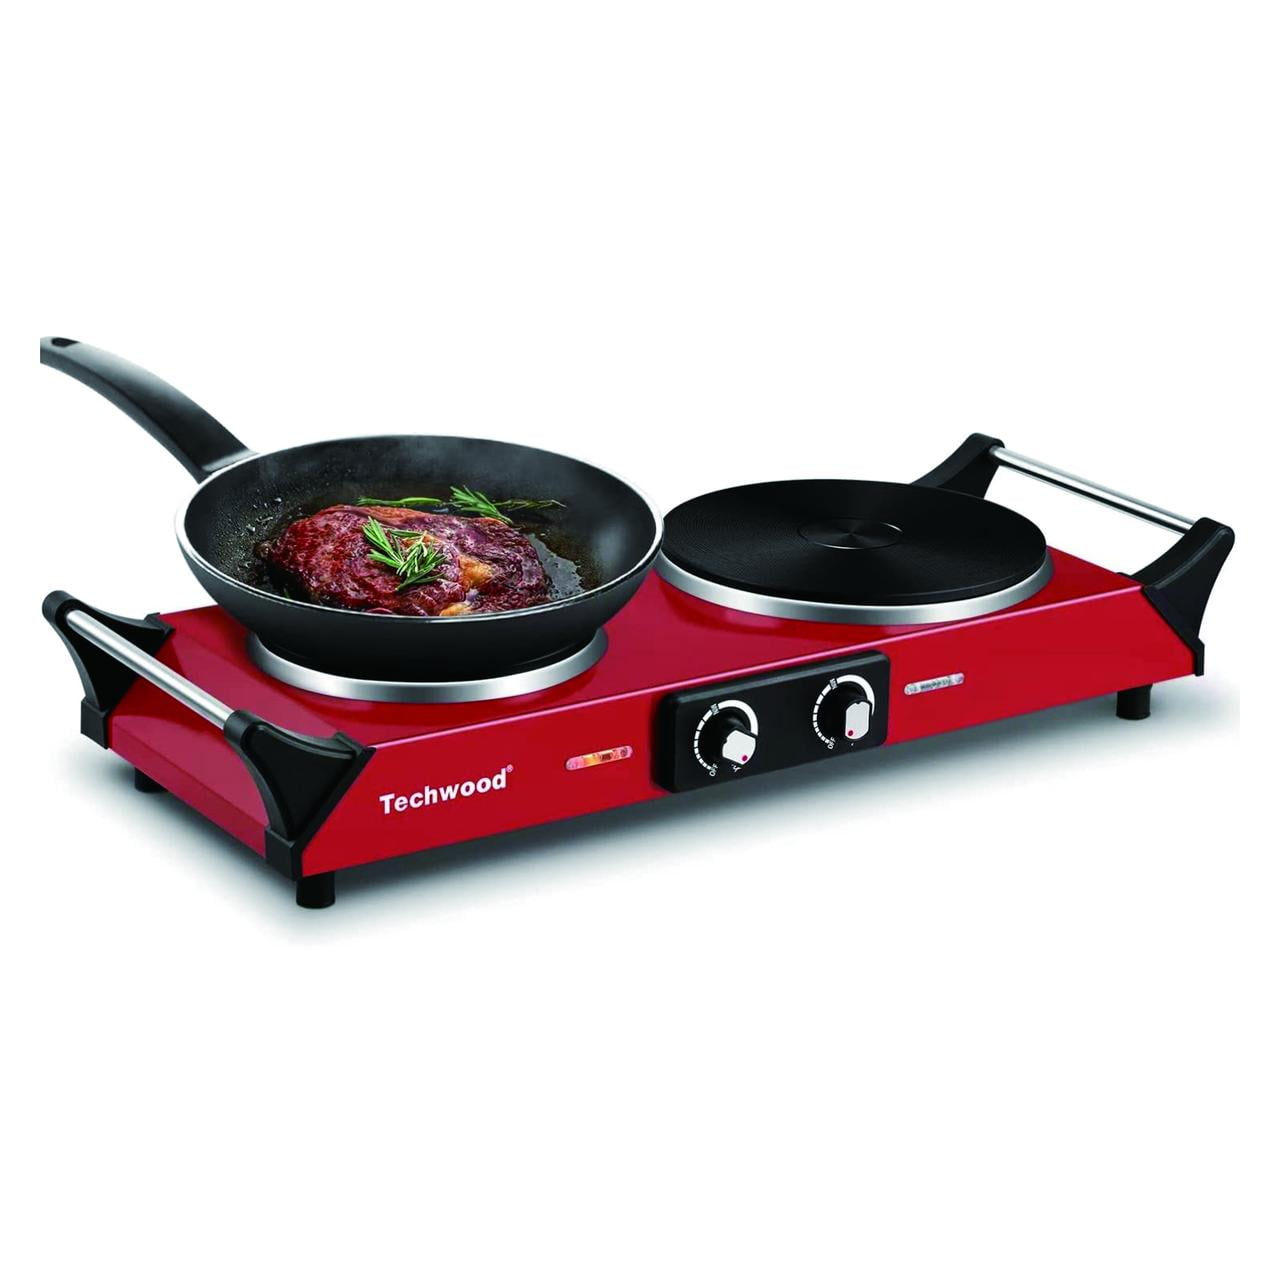 portable powerful cast iron electric hot